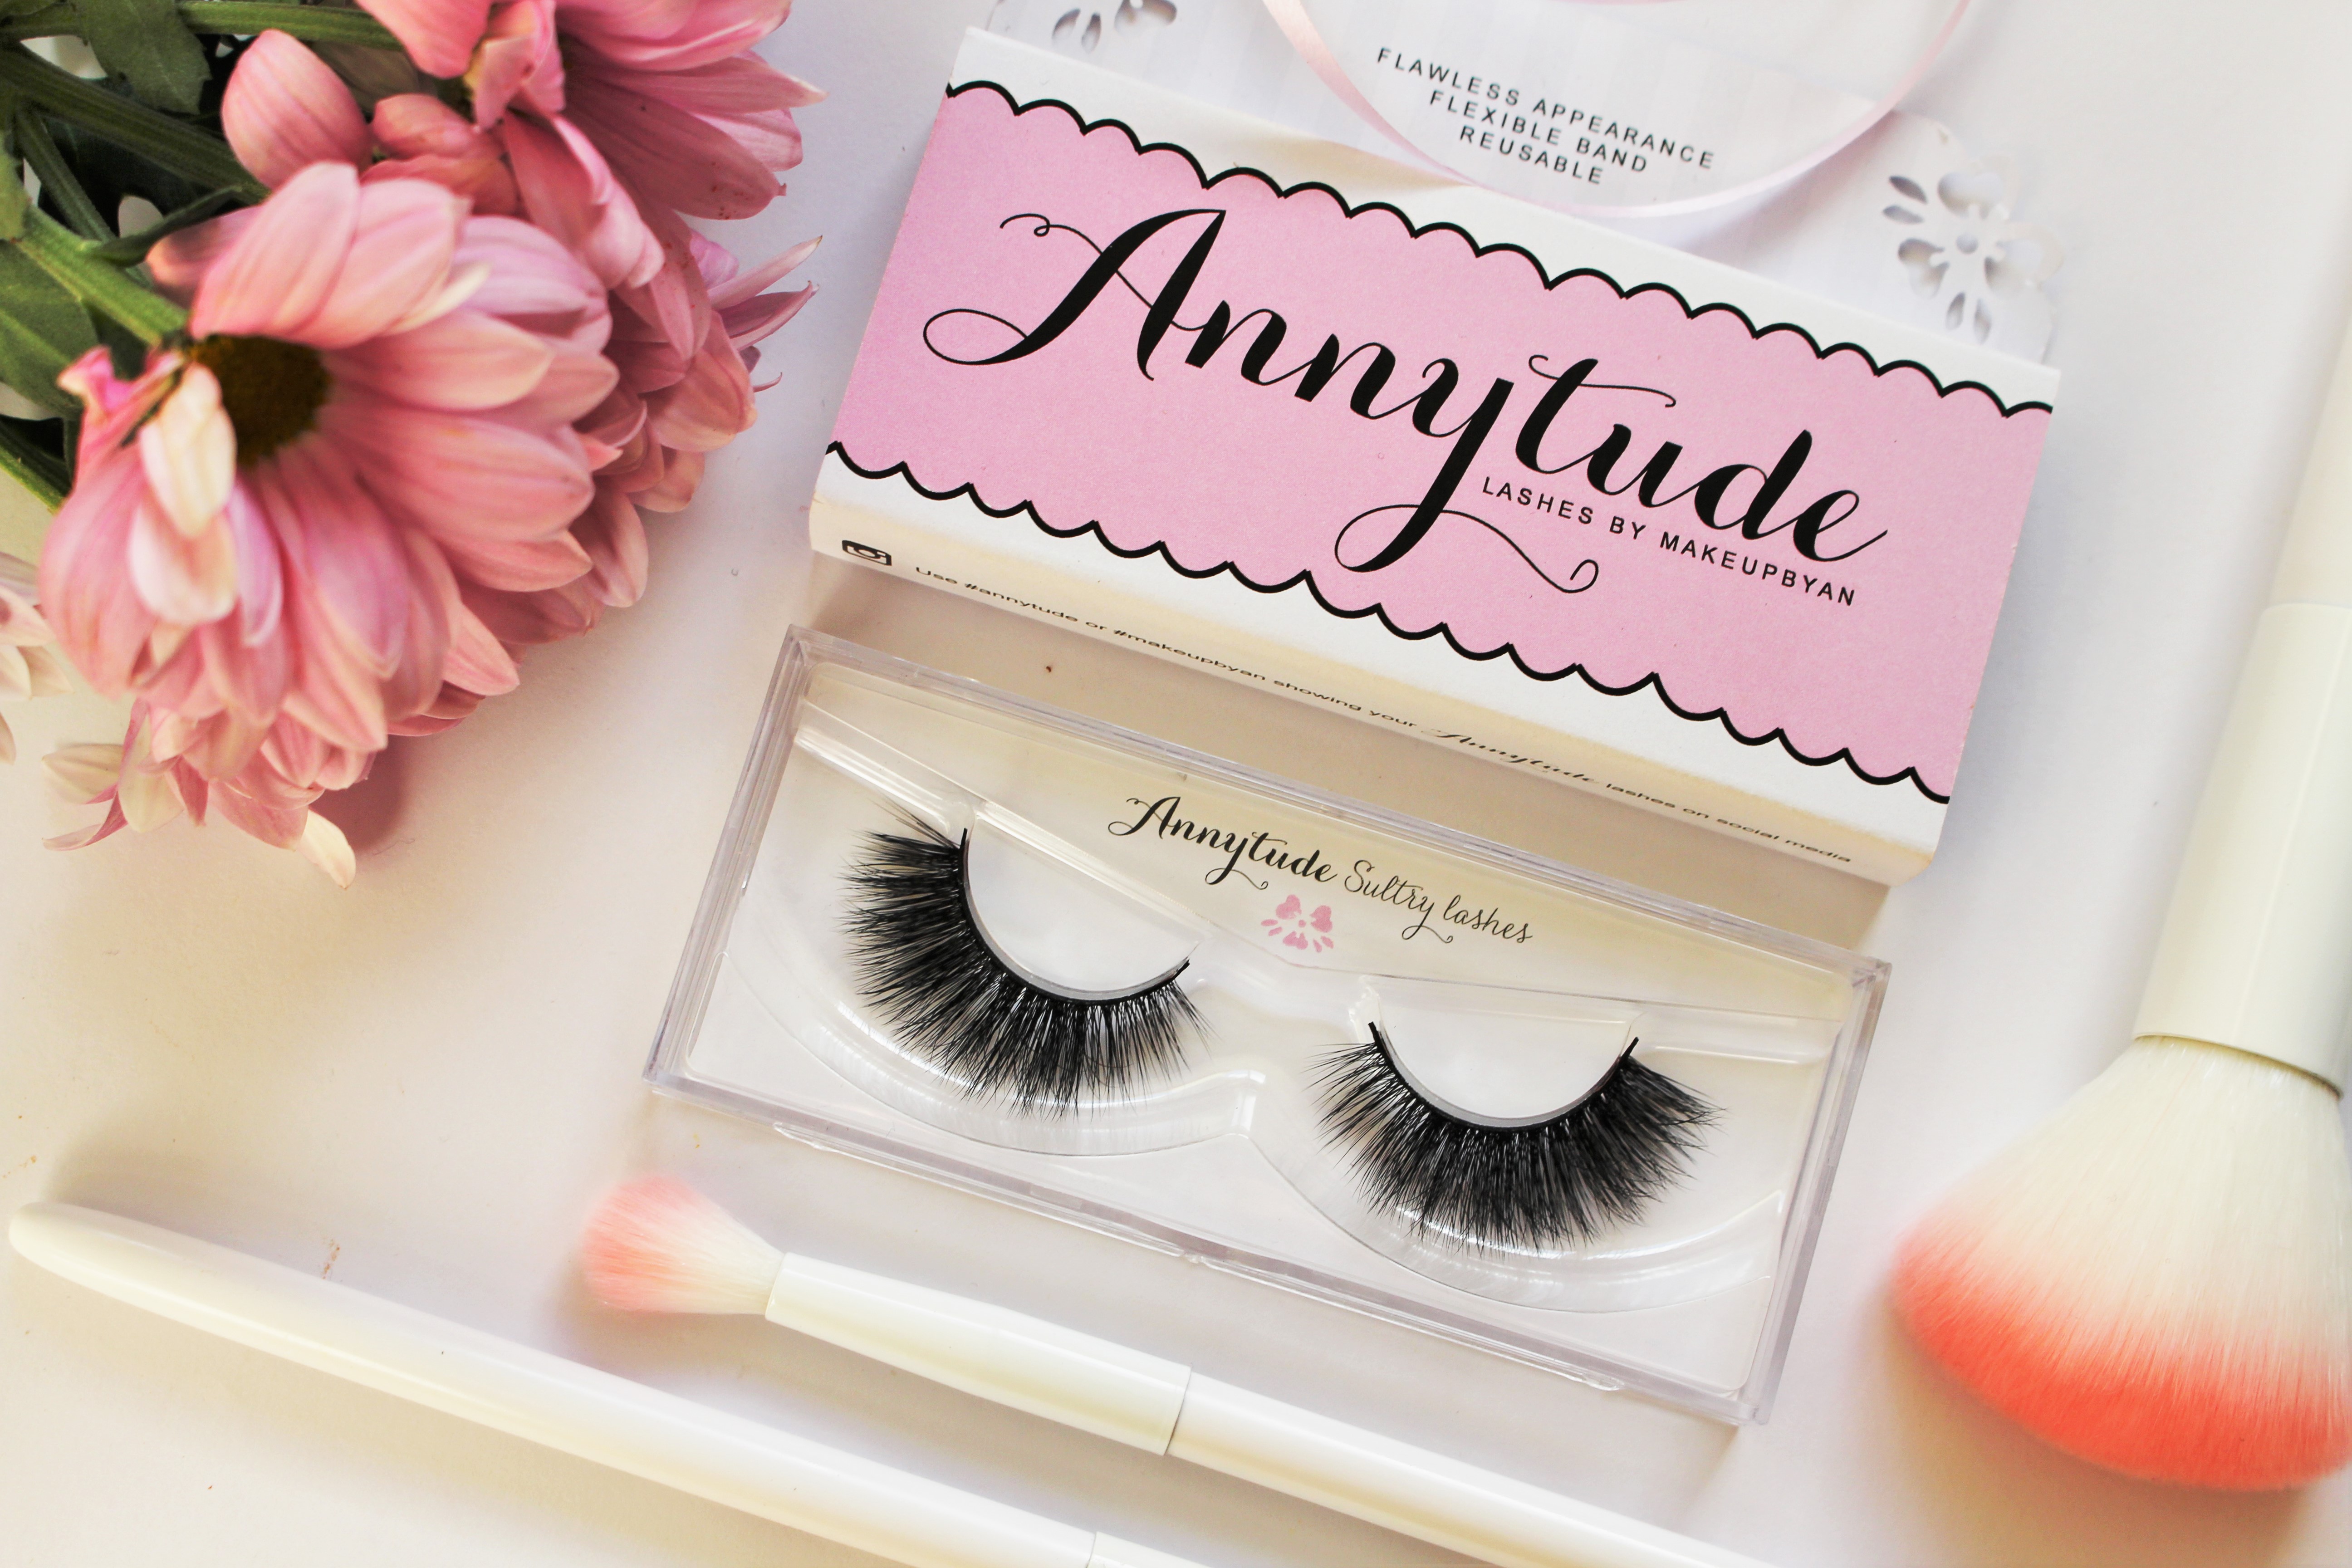 Annytude Sultry lashes review | vergeleken met AliExpress wimpers